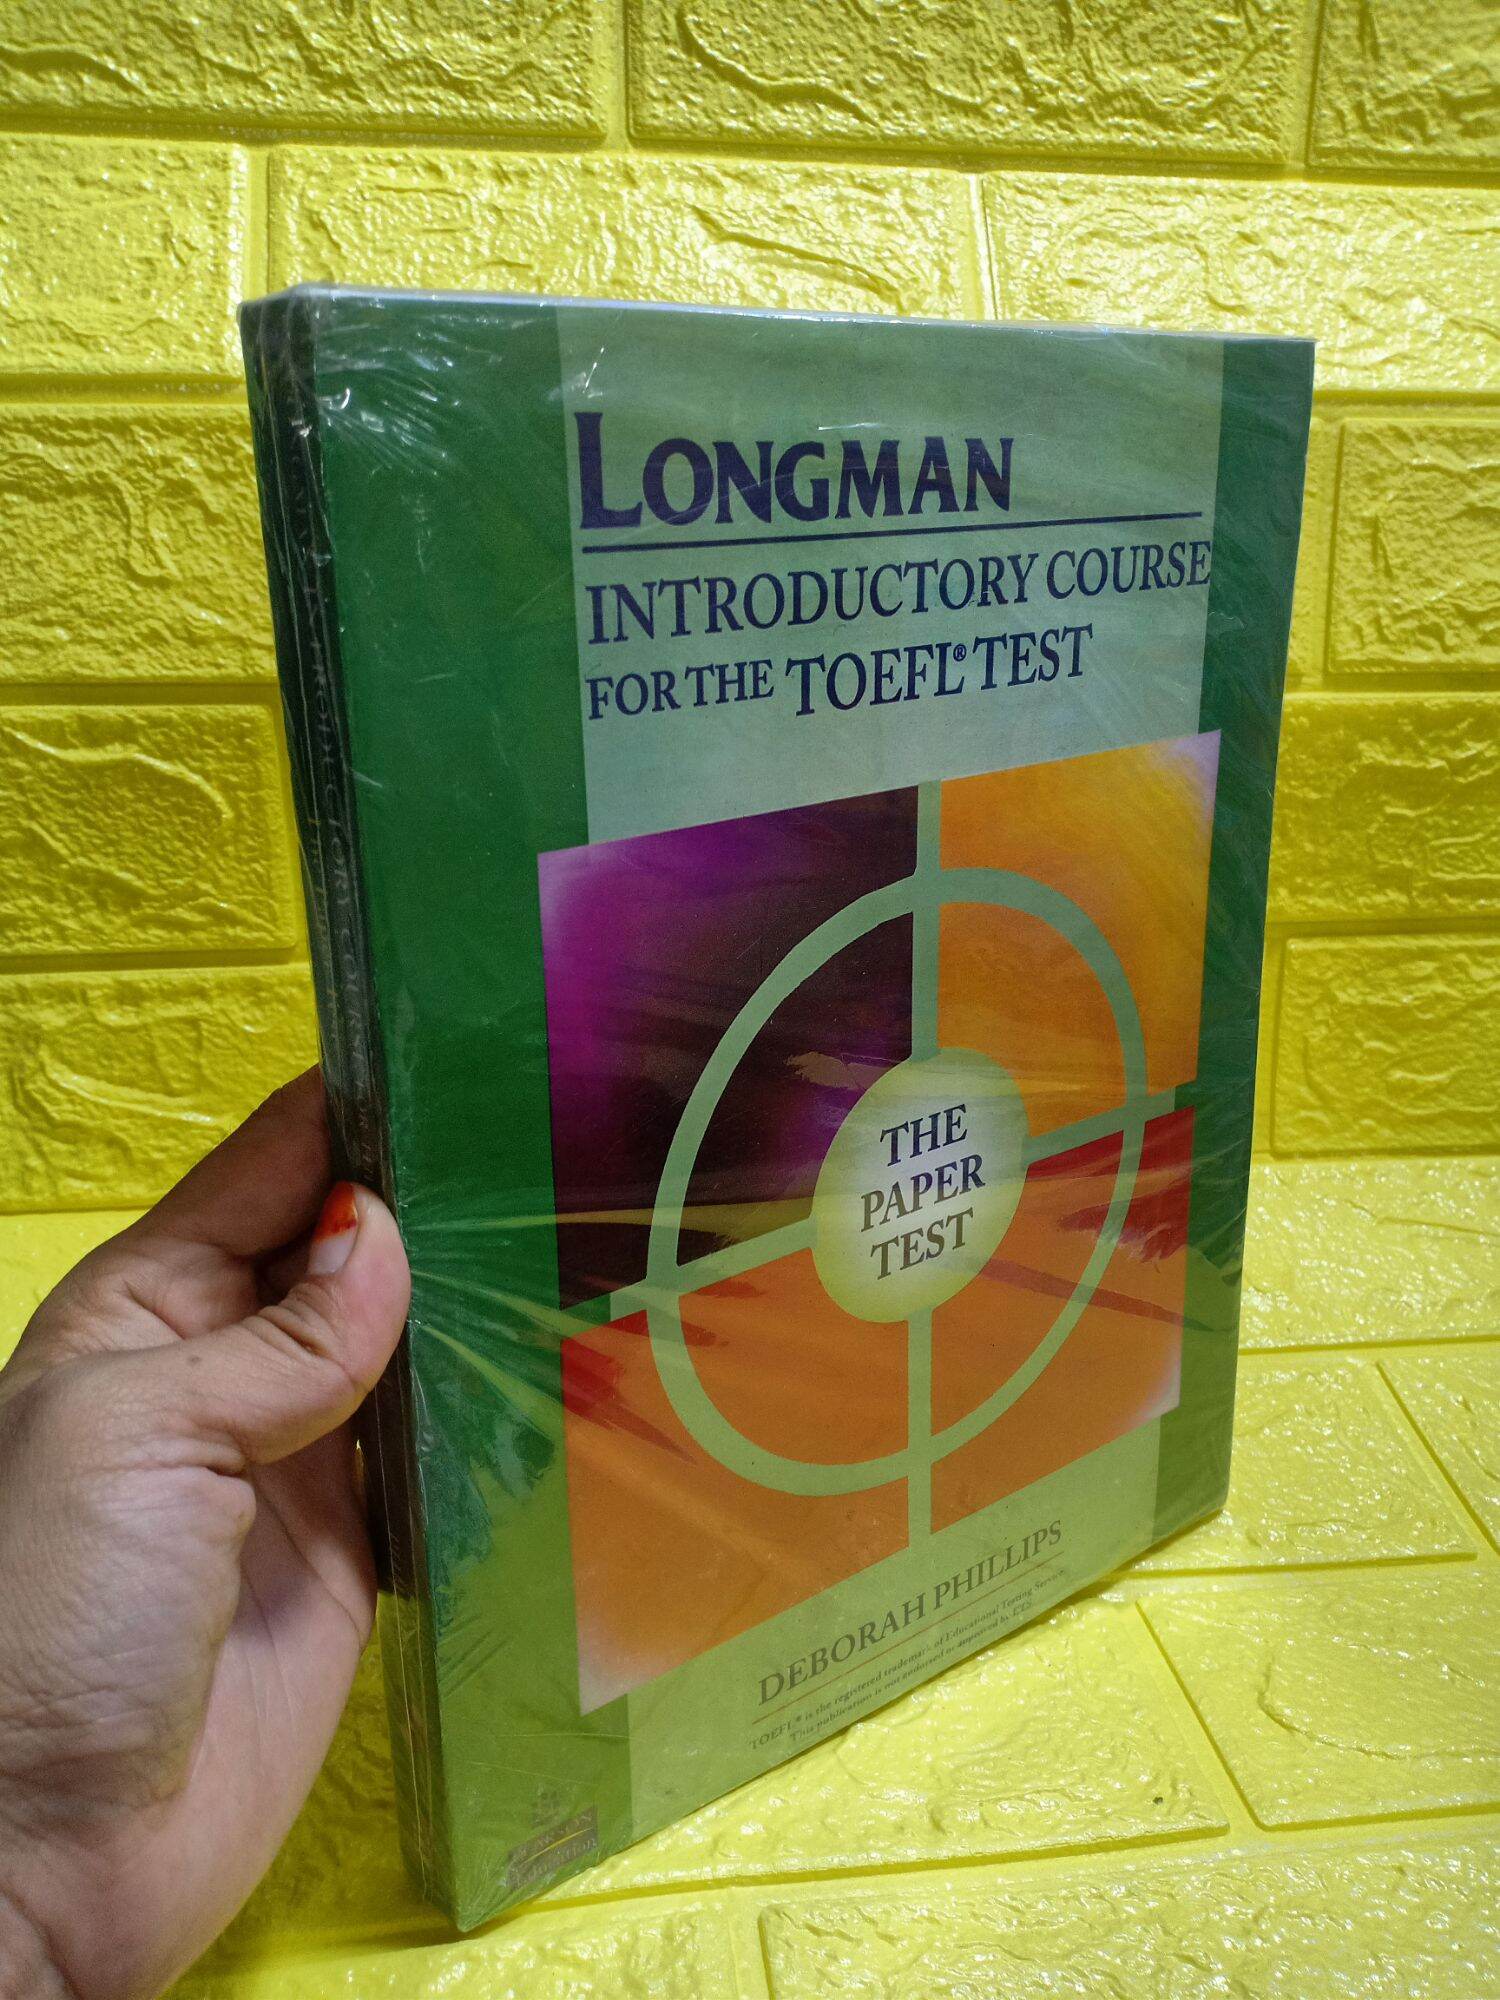 LONGMAN INTRODUCTORY COURSE FOR THE TOEFL TEST | Lazada Indonesia